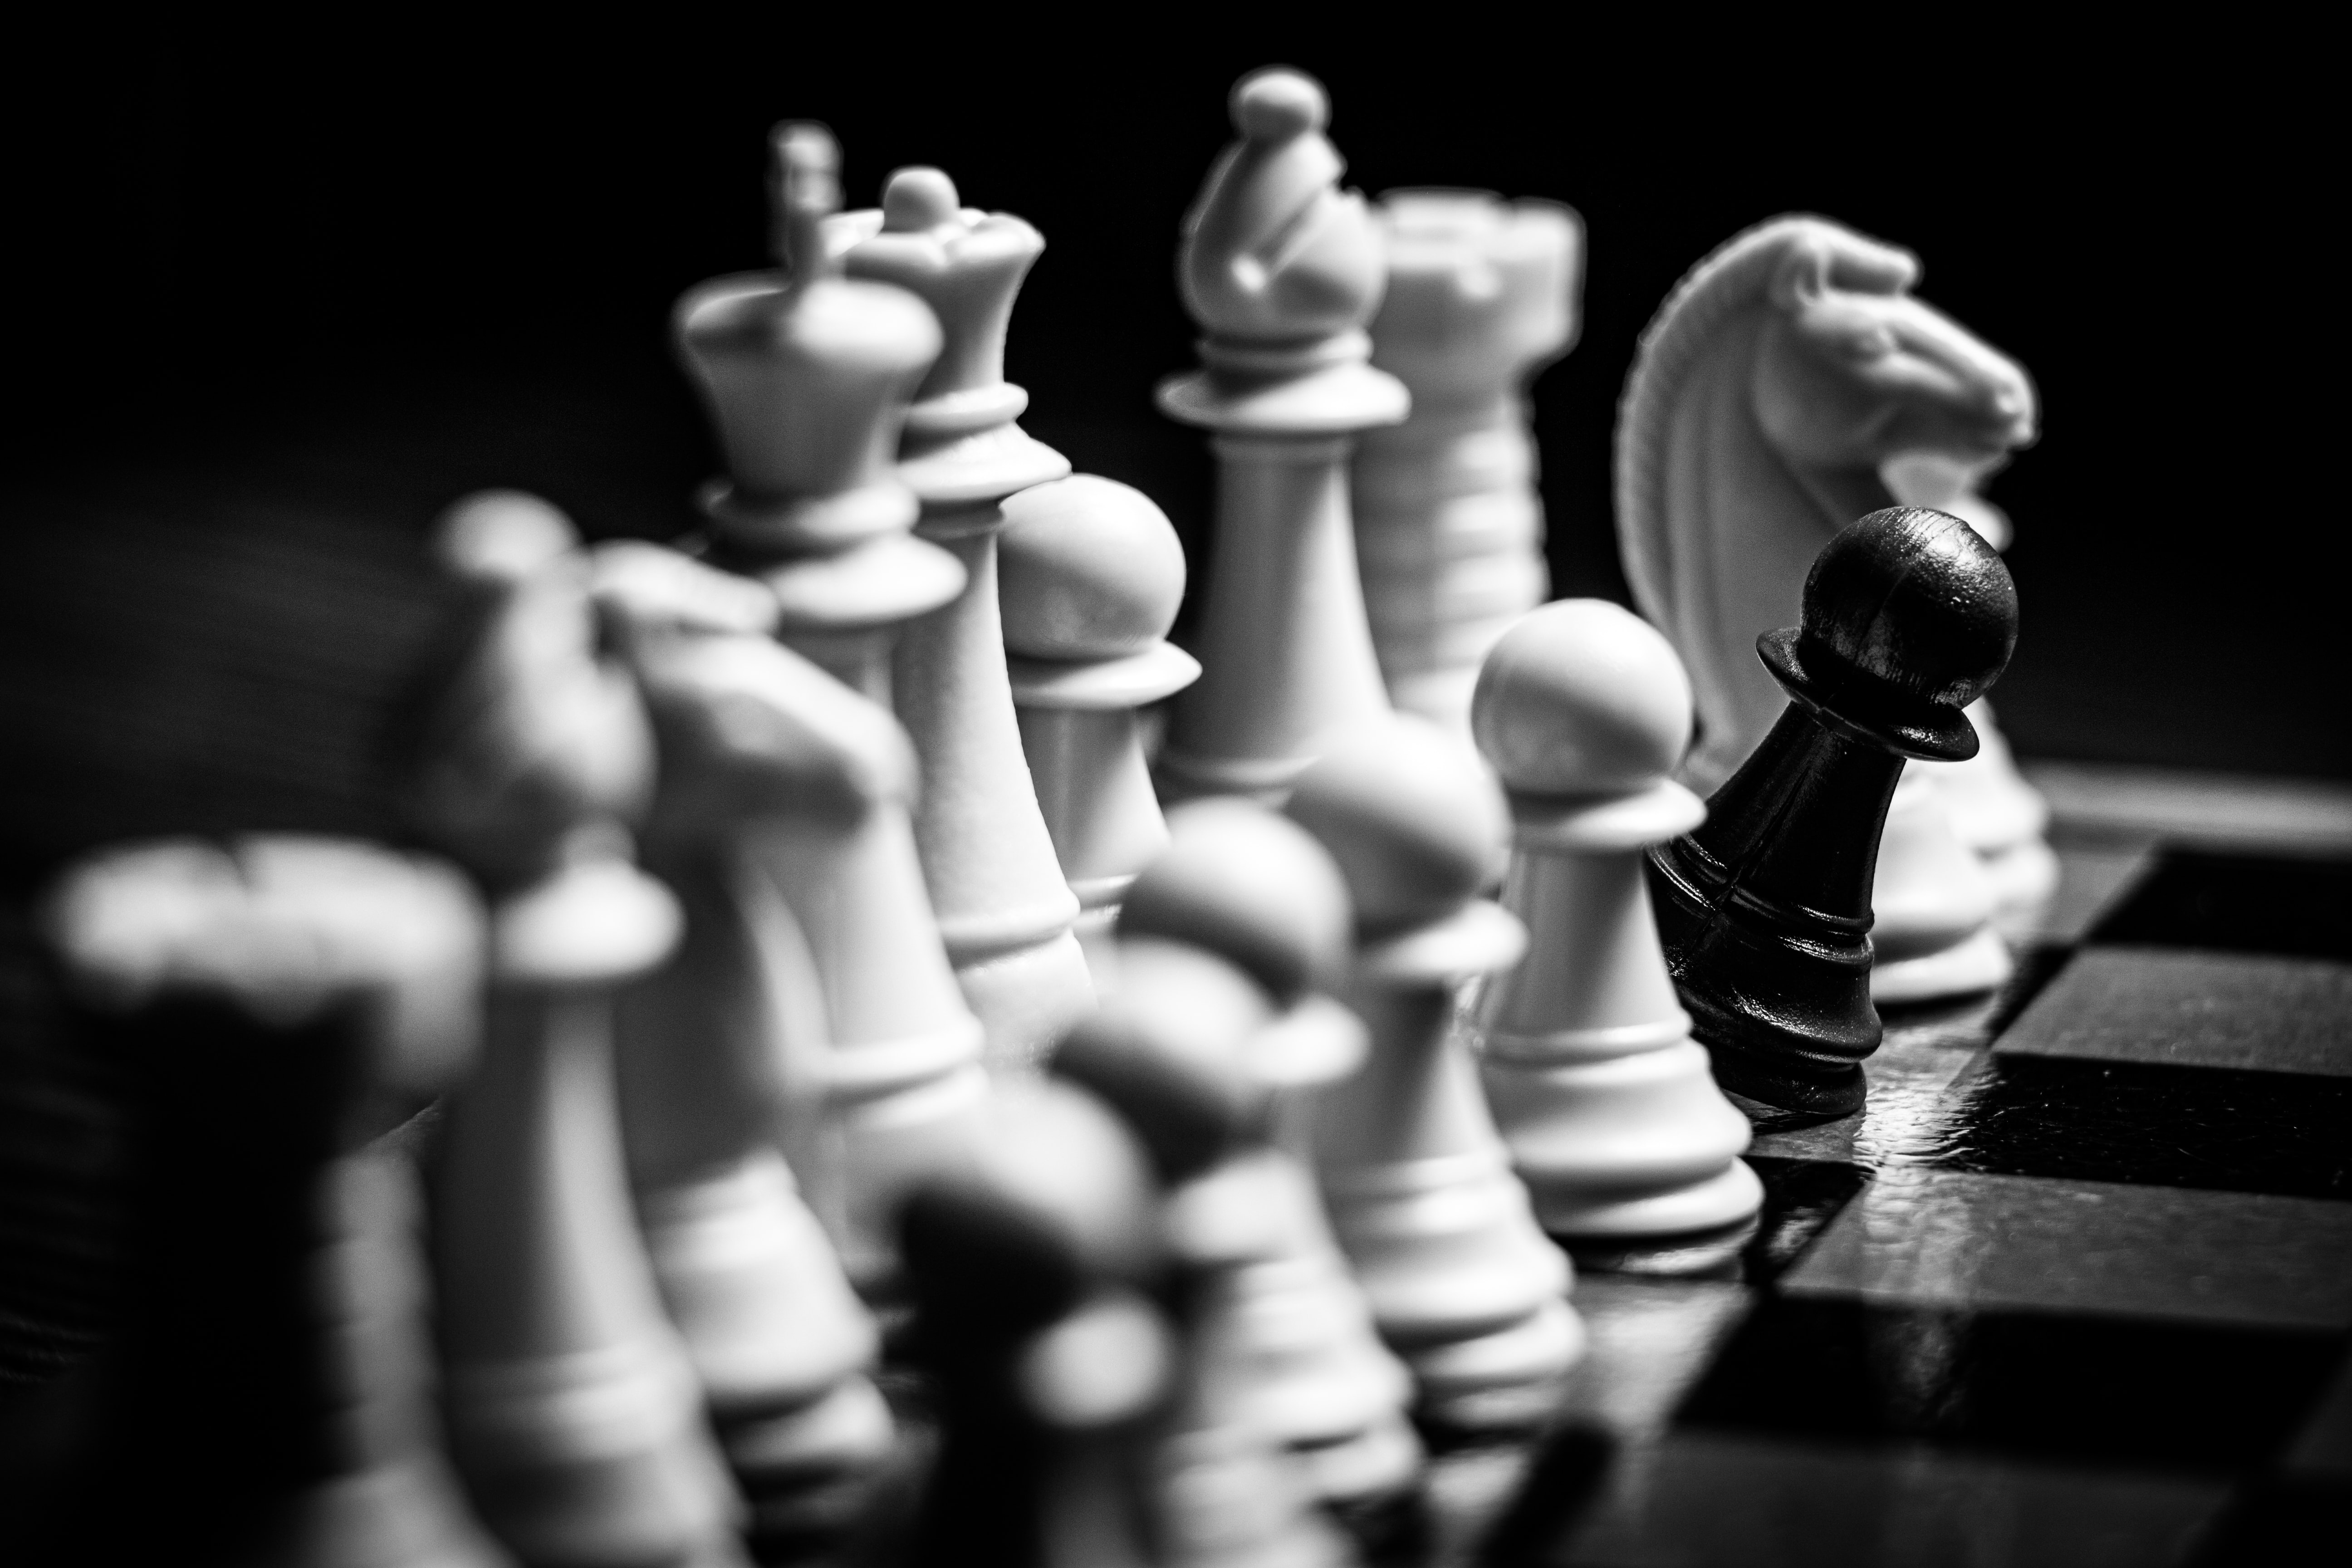 chess, games, miscellanea, miscellaneous, shapes, shape, game, board wallpapers for tablet